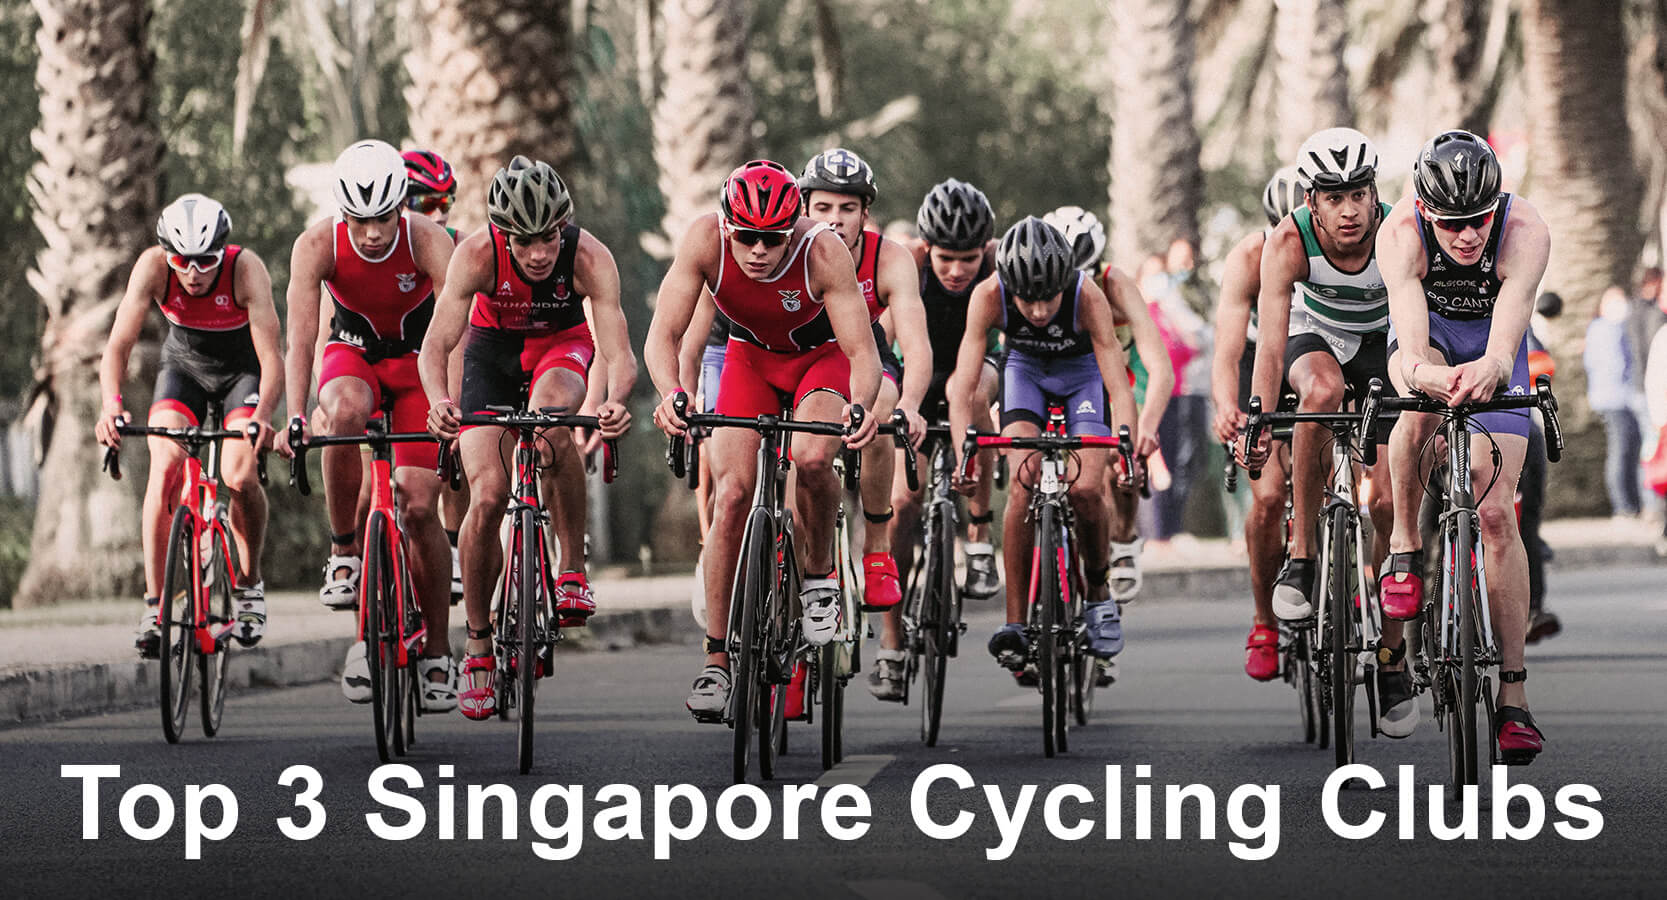 Top 3 Singapore Cycling Clubs 2021